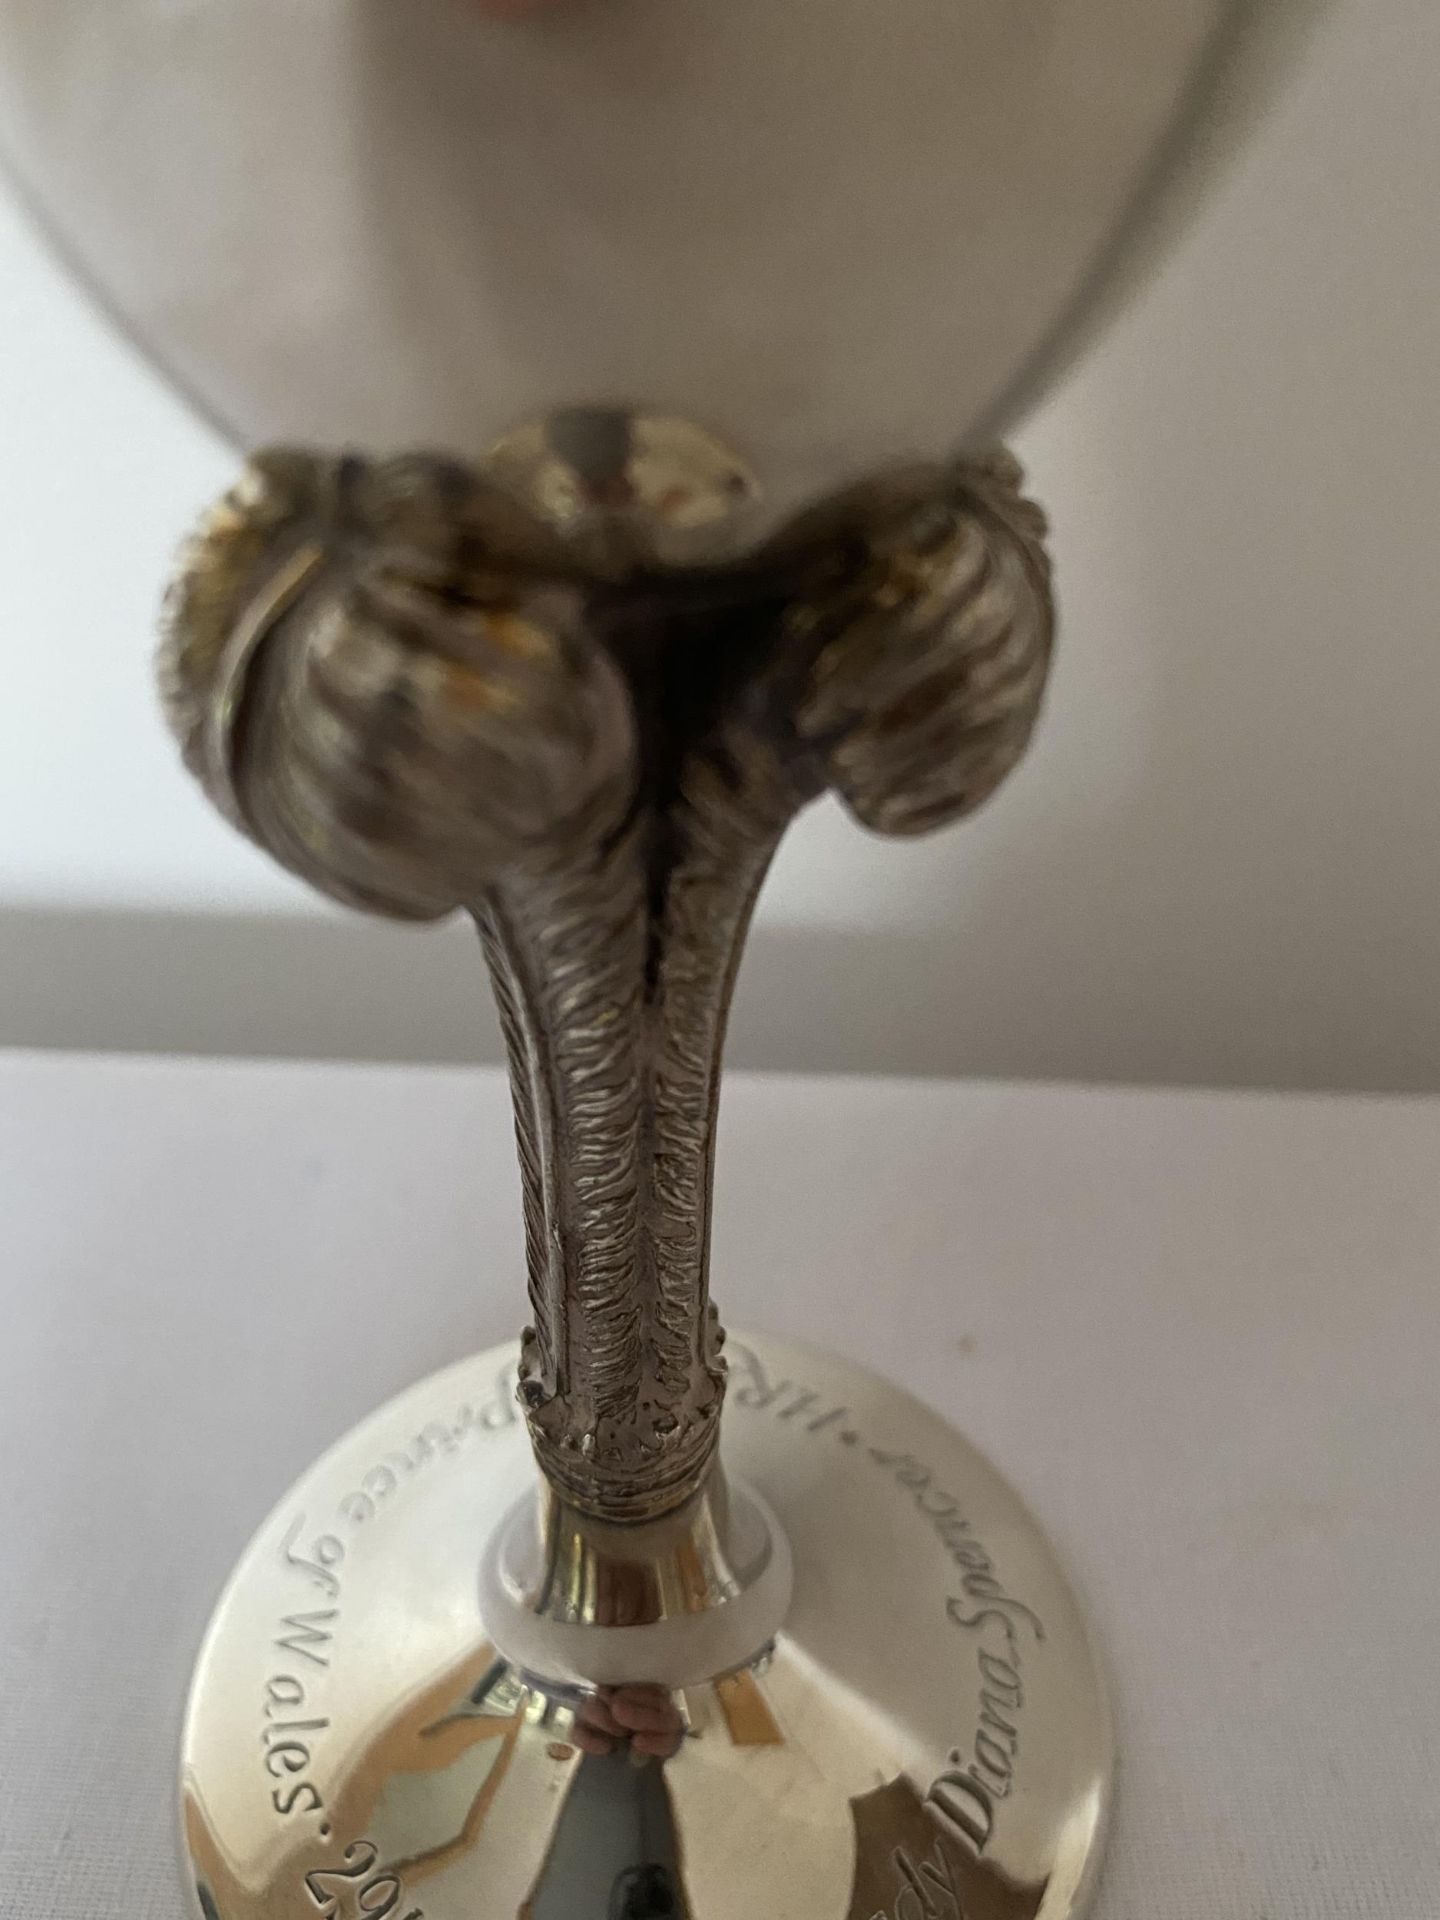 AN ELIZABETH II 1981 HALLMARKED LONDON SILVER COMMEMORATIVE LADY DIANA AND PRINCE CHARLES GOBLET - Image 15 of 24